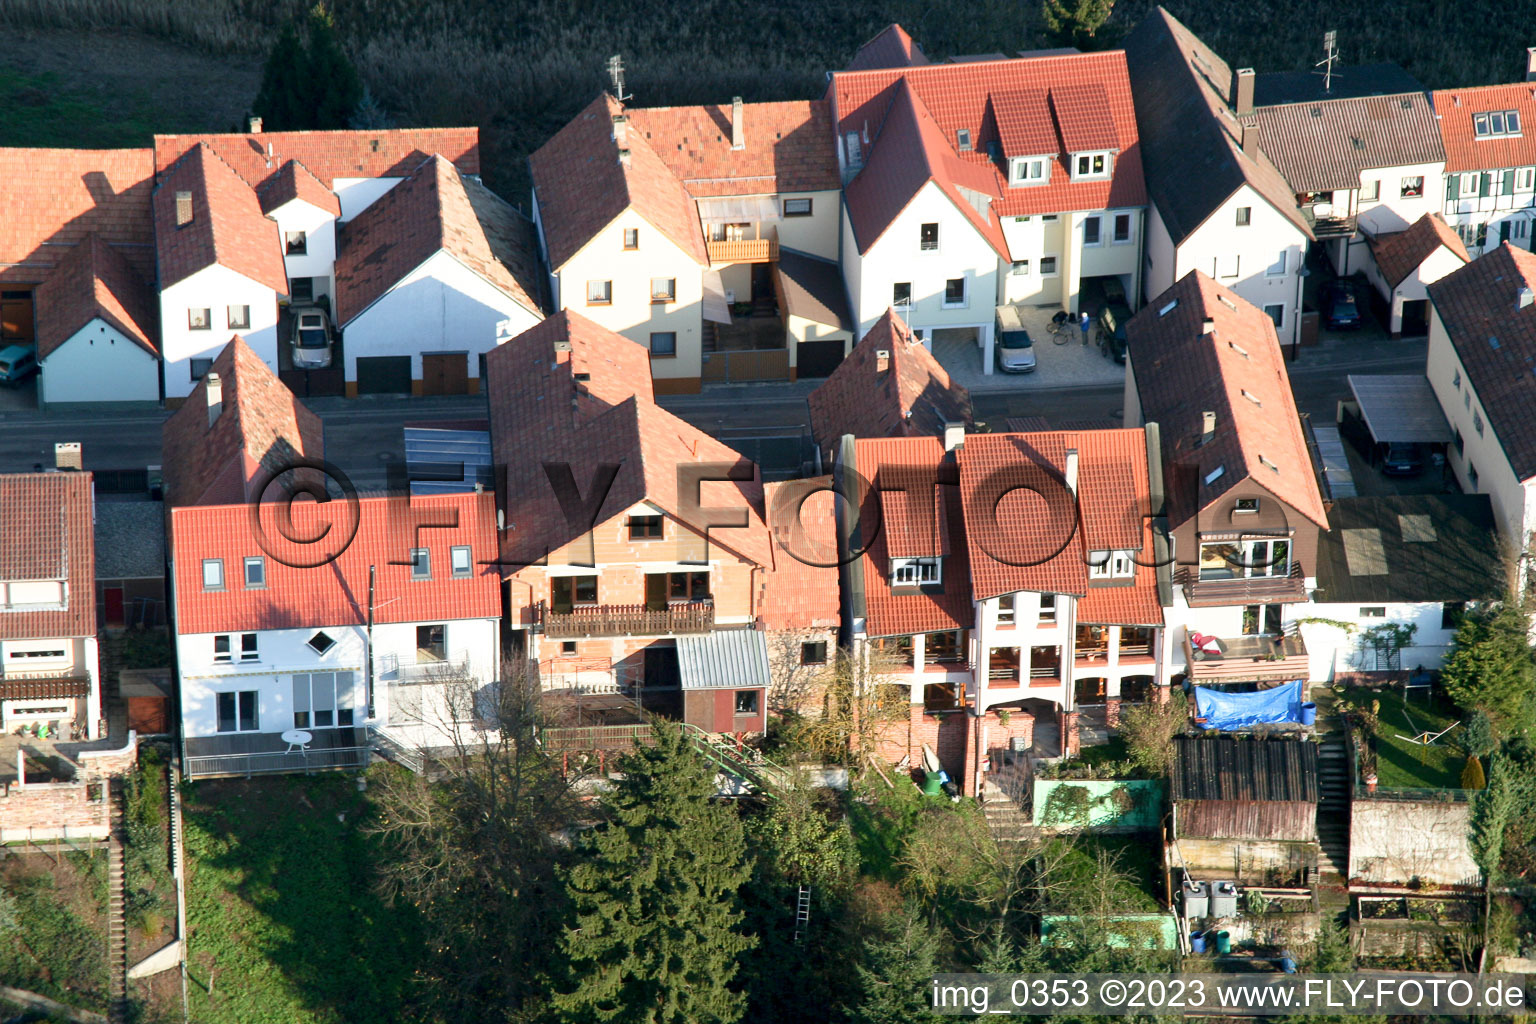 Ludwigstr in Jockgrim in the state Rhineland-Palatinate, Germany seen from above